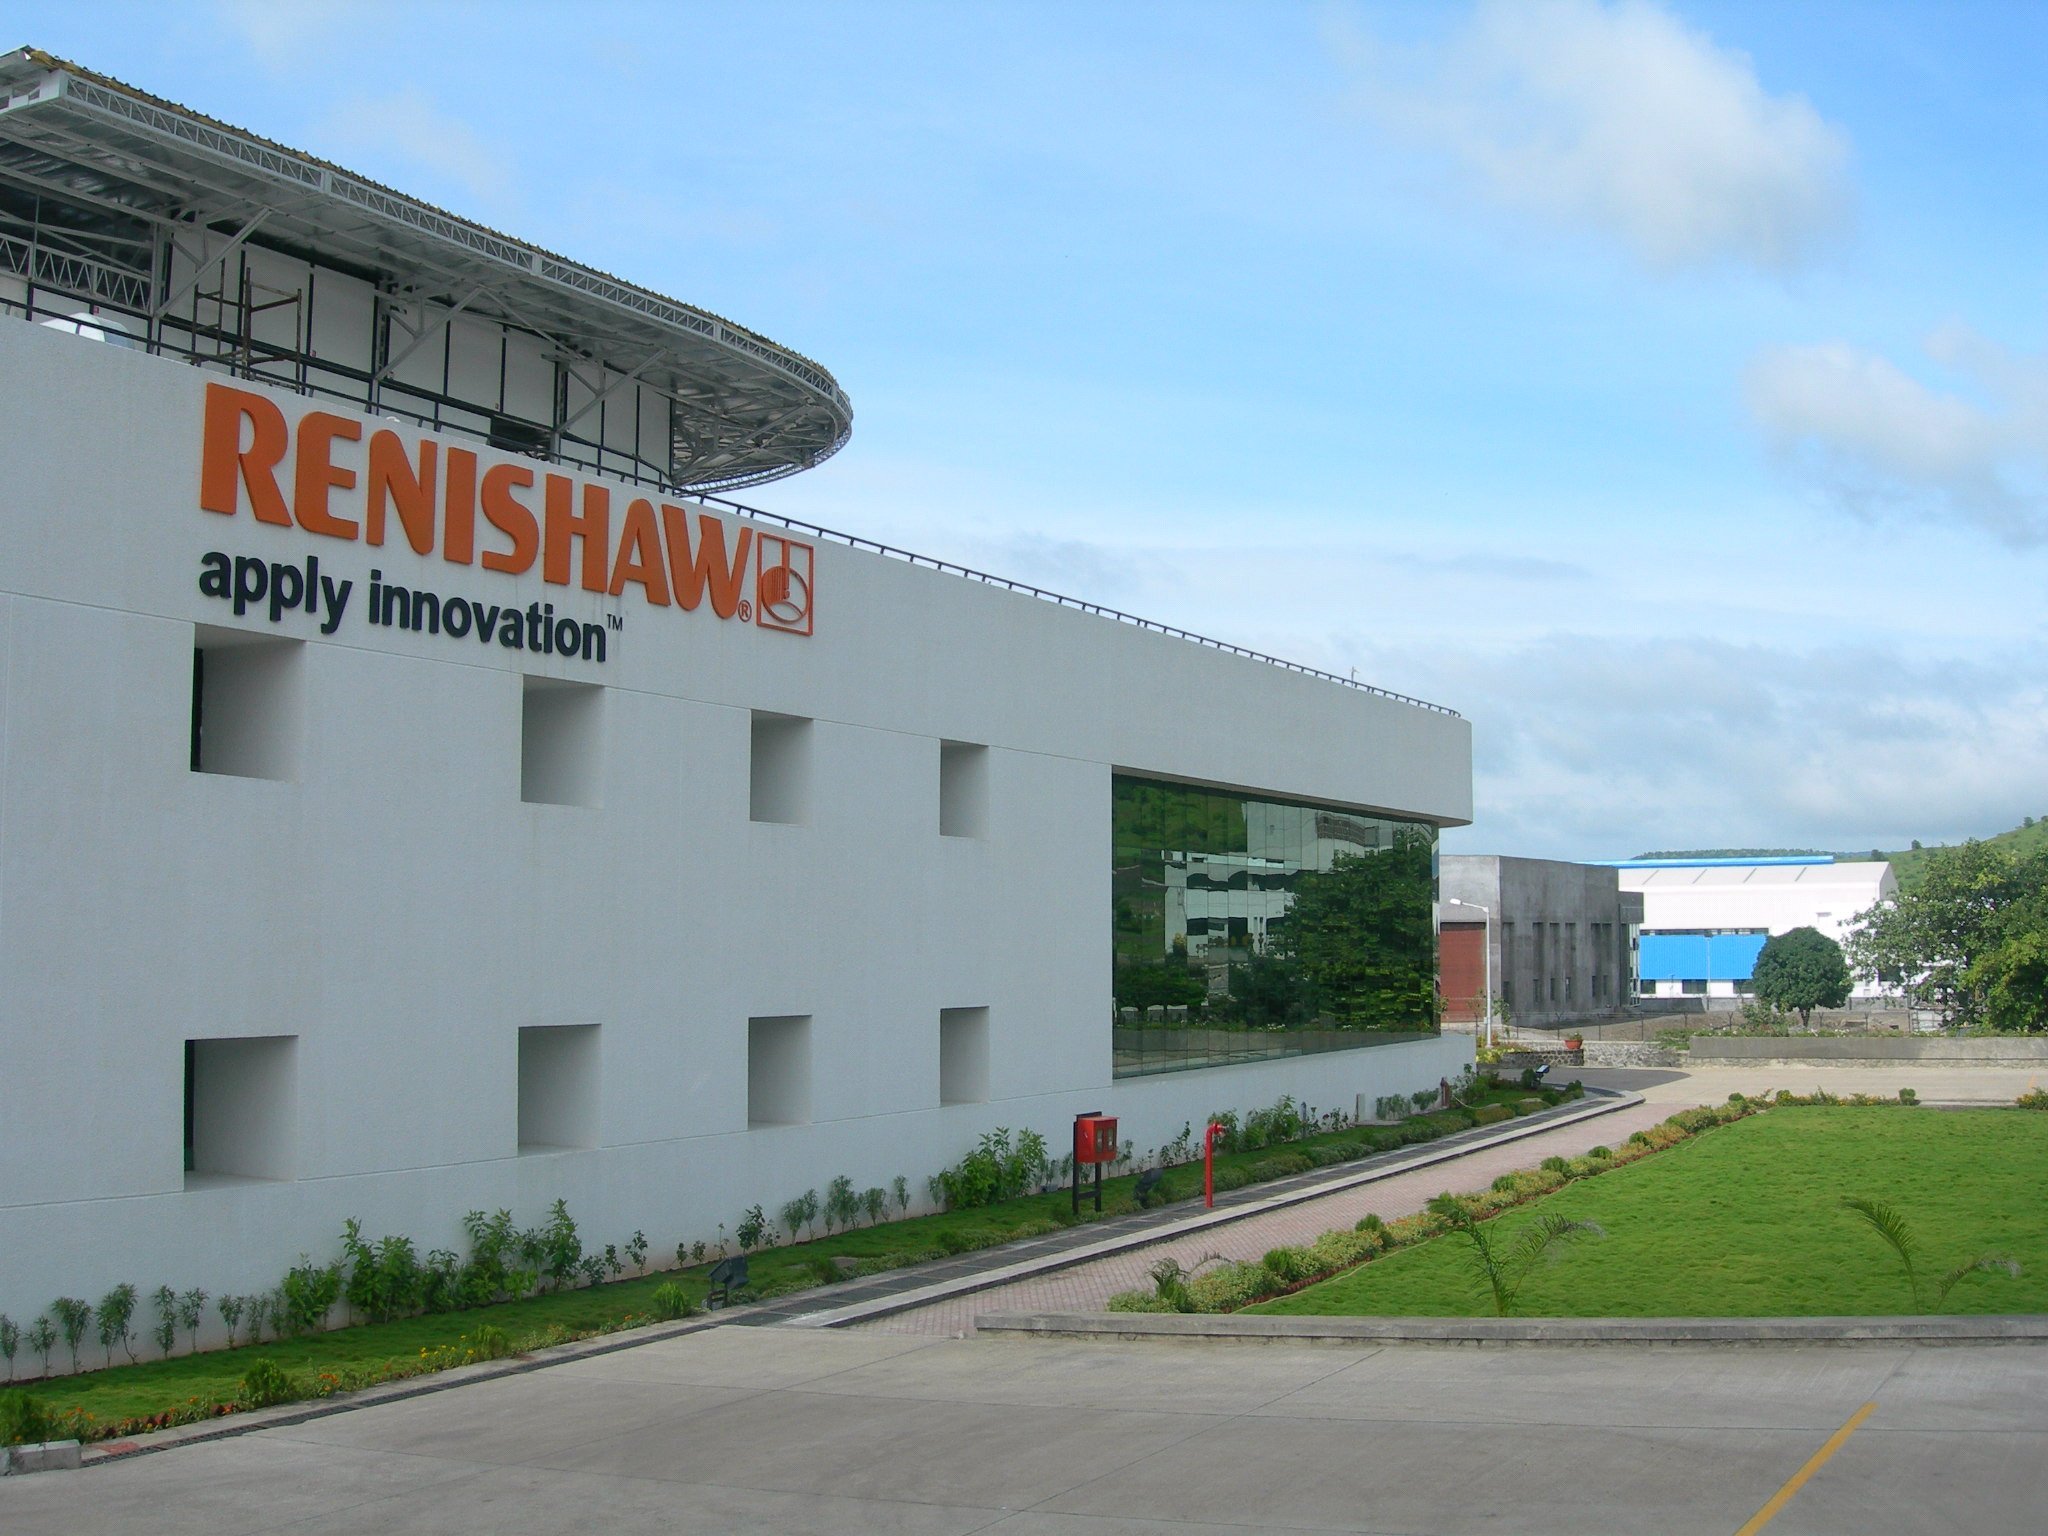 Renishaw has offices in five Indian cities, and operates from the city of Pune.